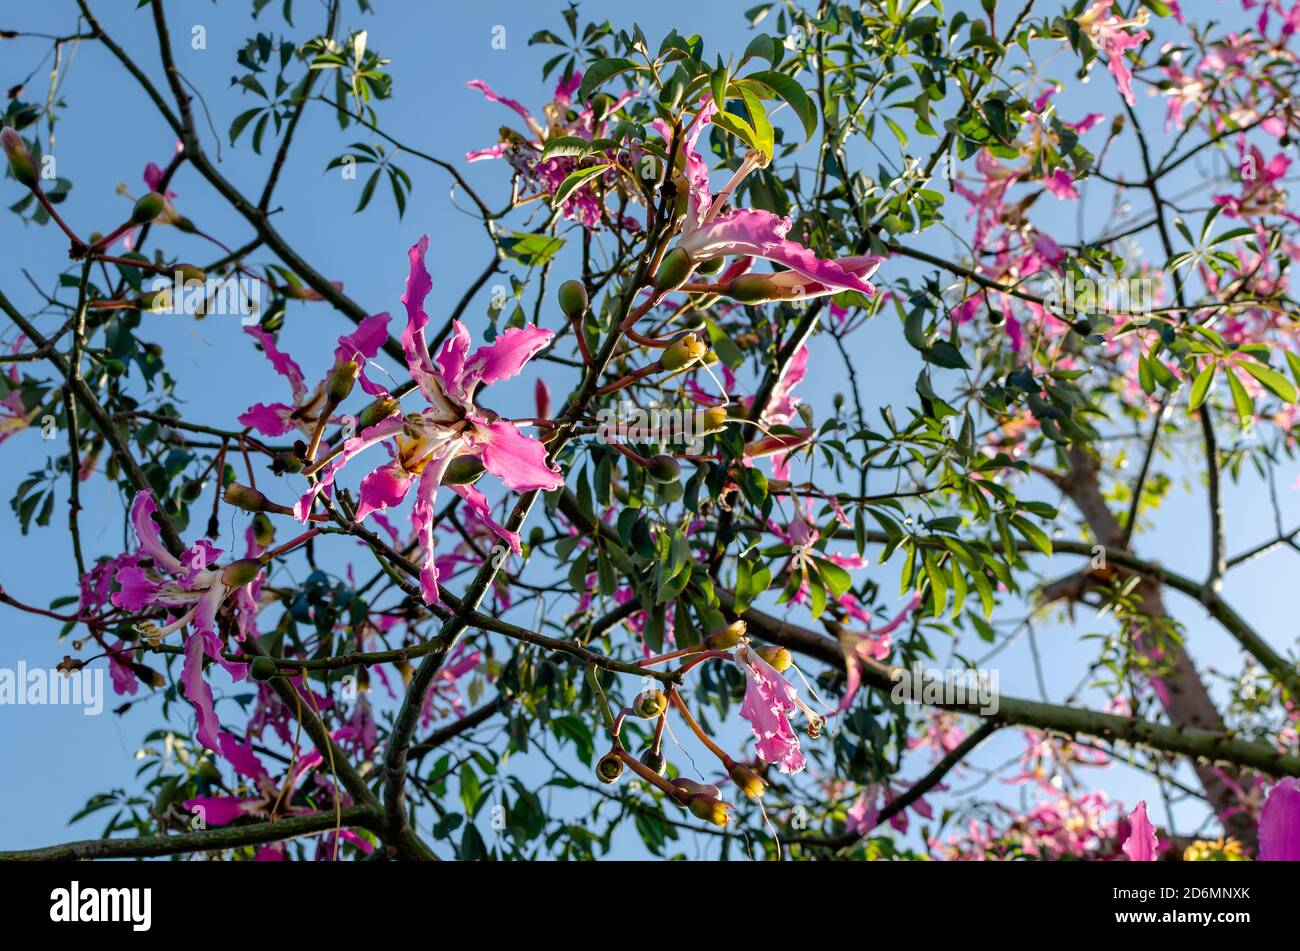 Closeup and selective focus on a pink flower of a Ceiba Speciosa or silk floss tree on a blue sky background. Stock Photo